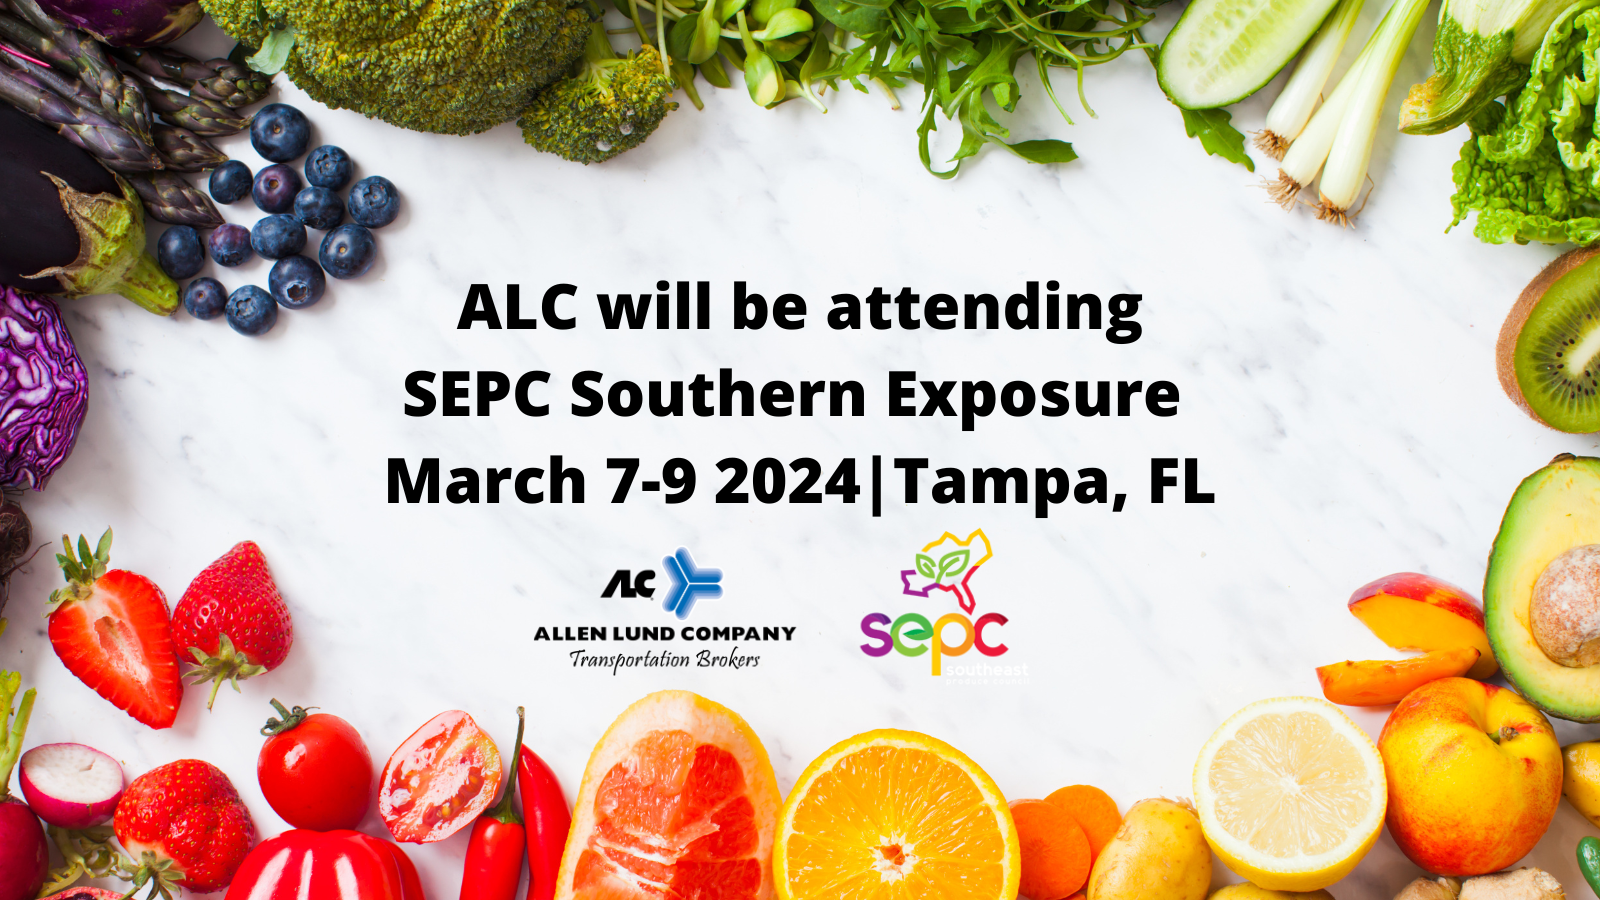 ALC will be attending SEPC Southern Exposure 2024